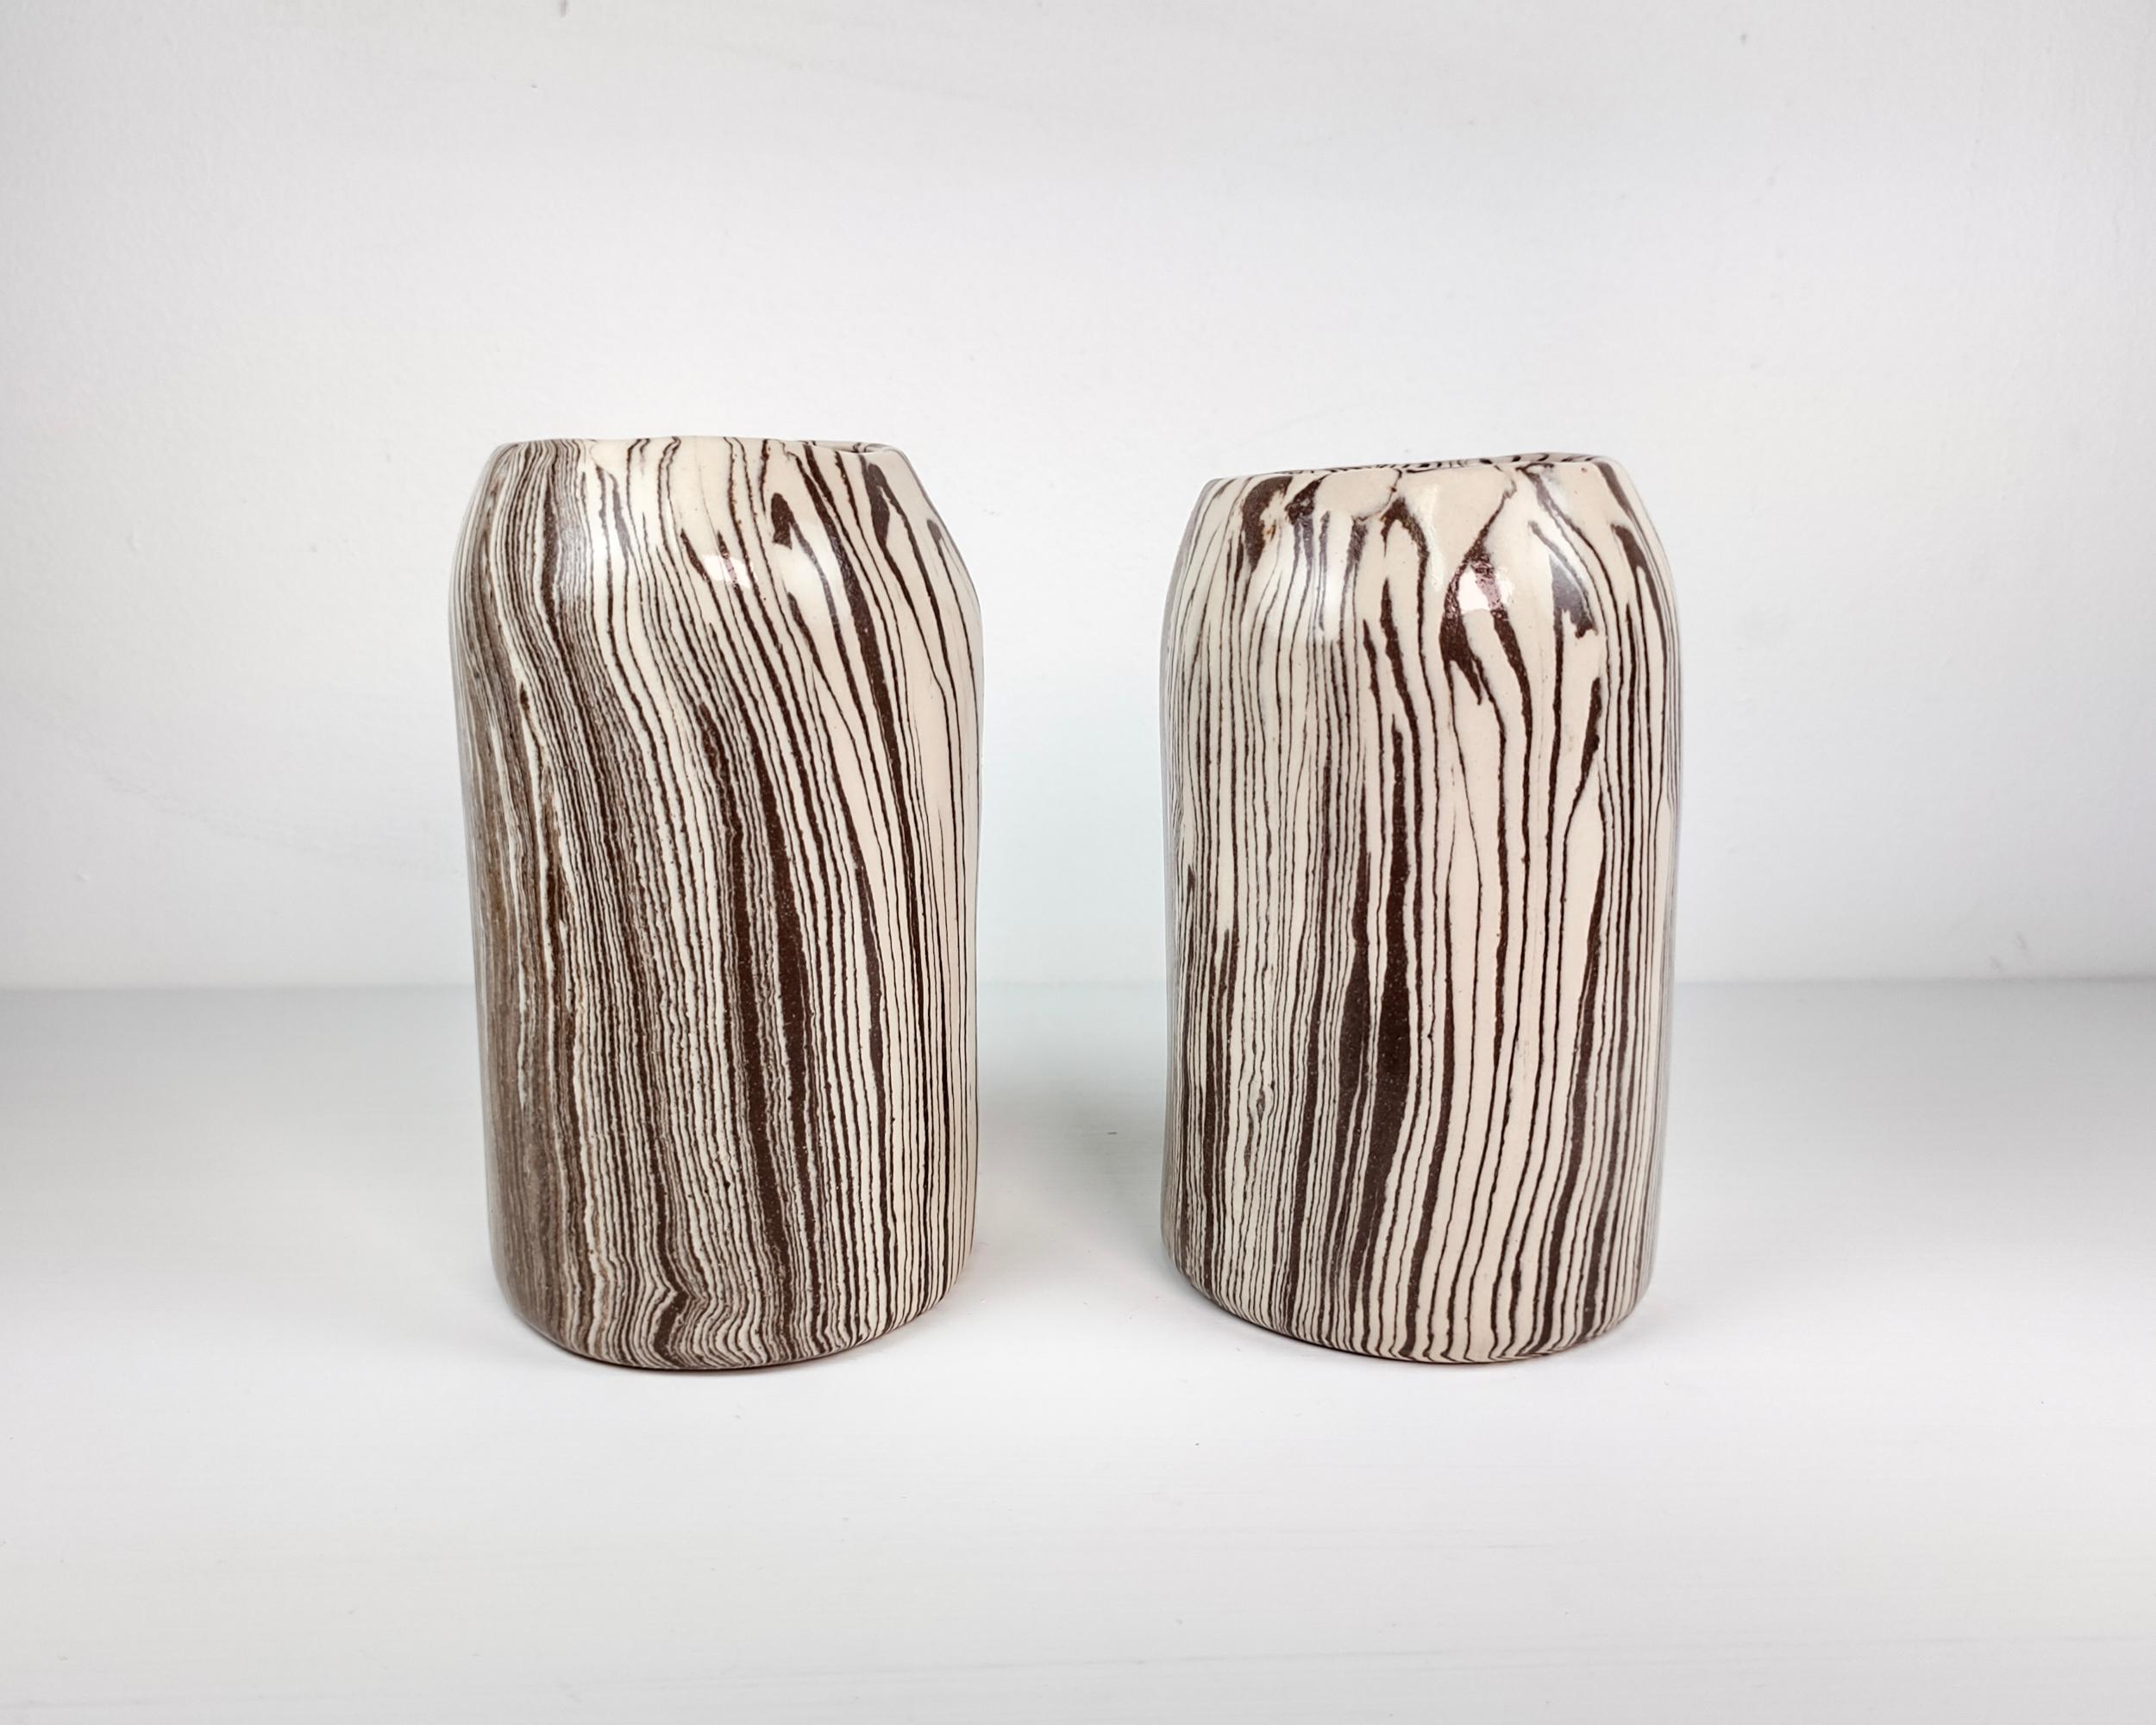 Each vase is formed by putting a slab of alternating clays together before forming into a cylinder and sculpting to the finished shape. Before each firing stage, the clay smudges are sanded and polished away to create sharpness and definition